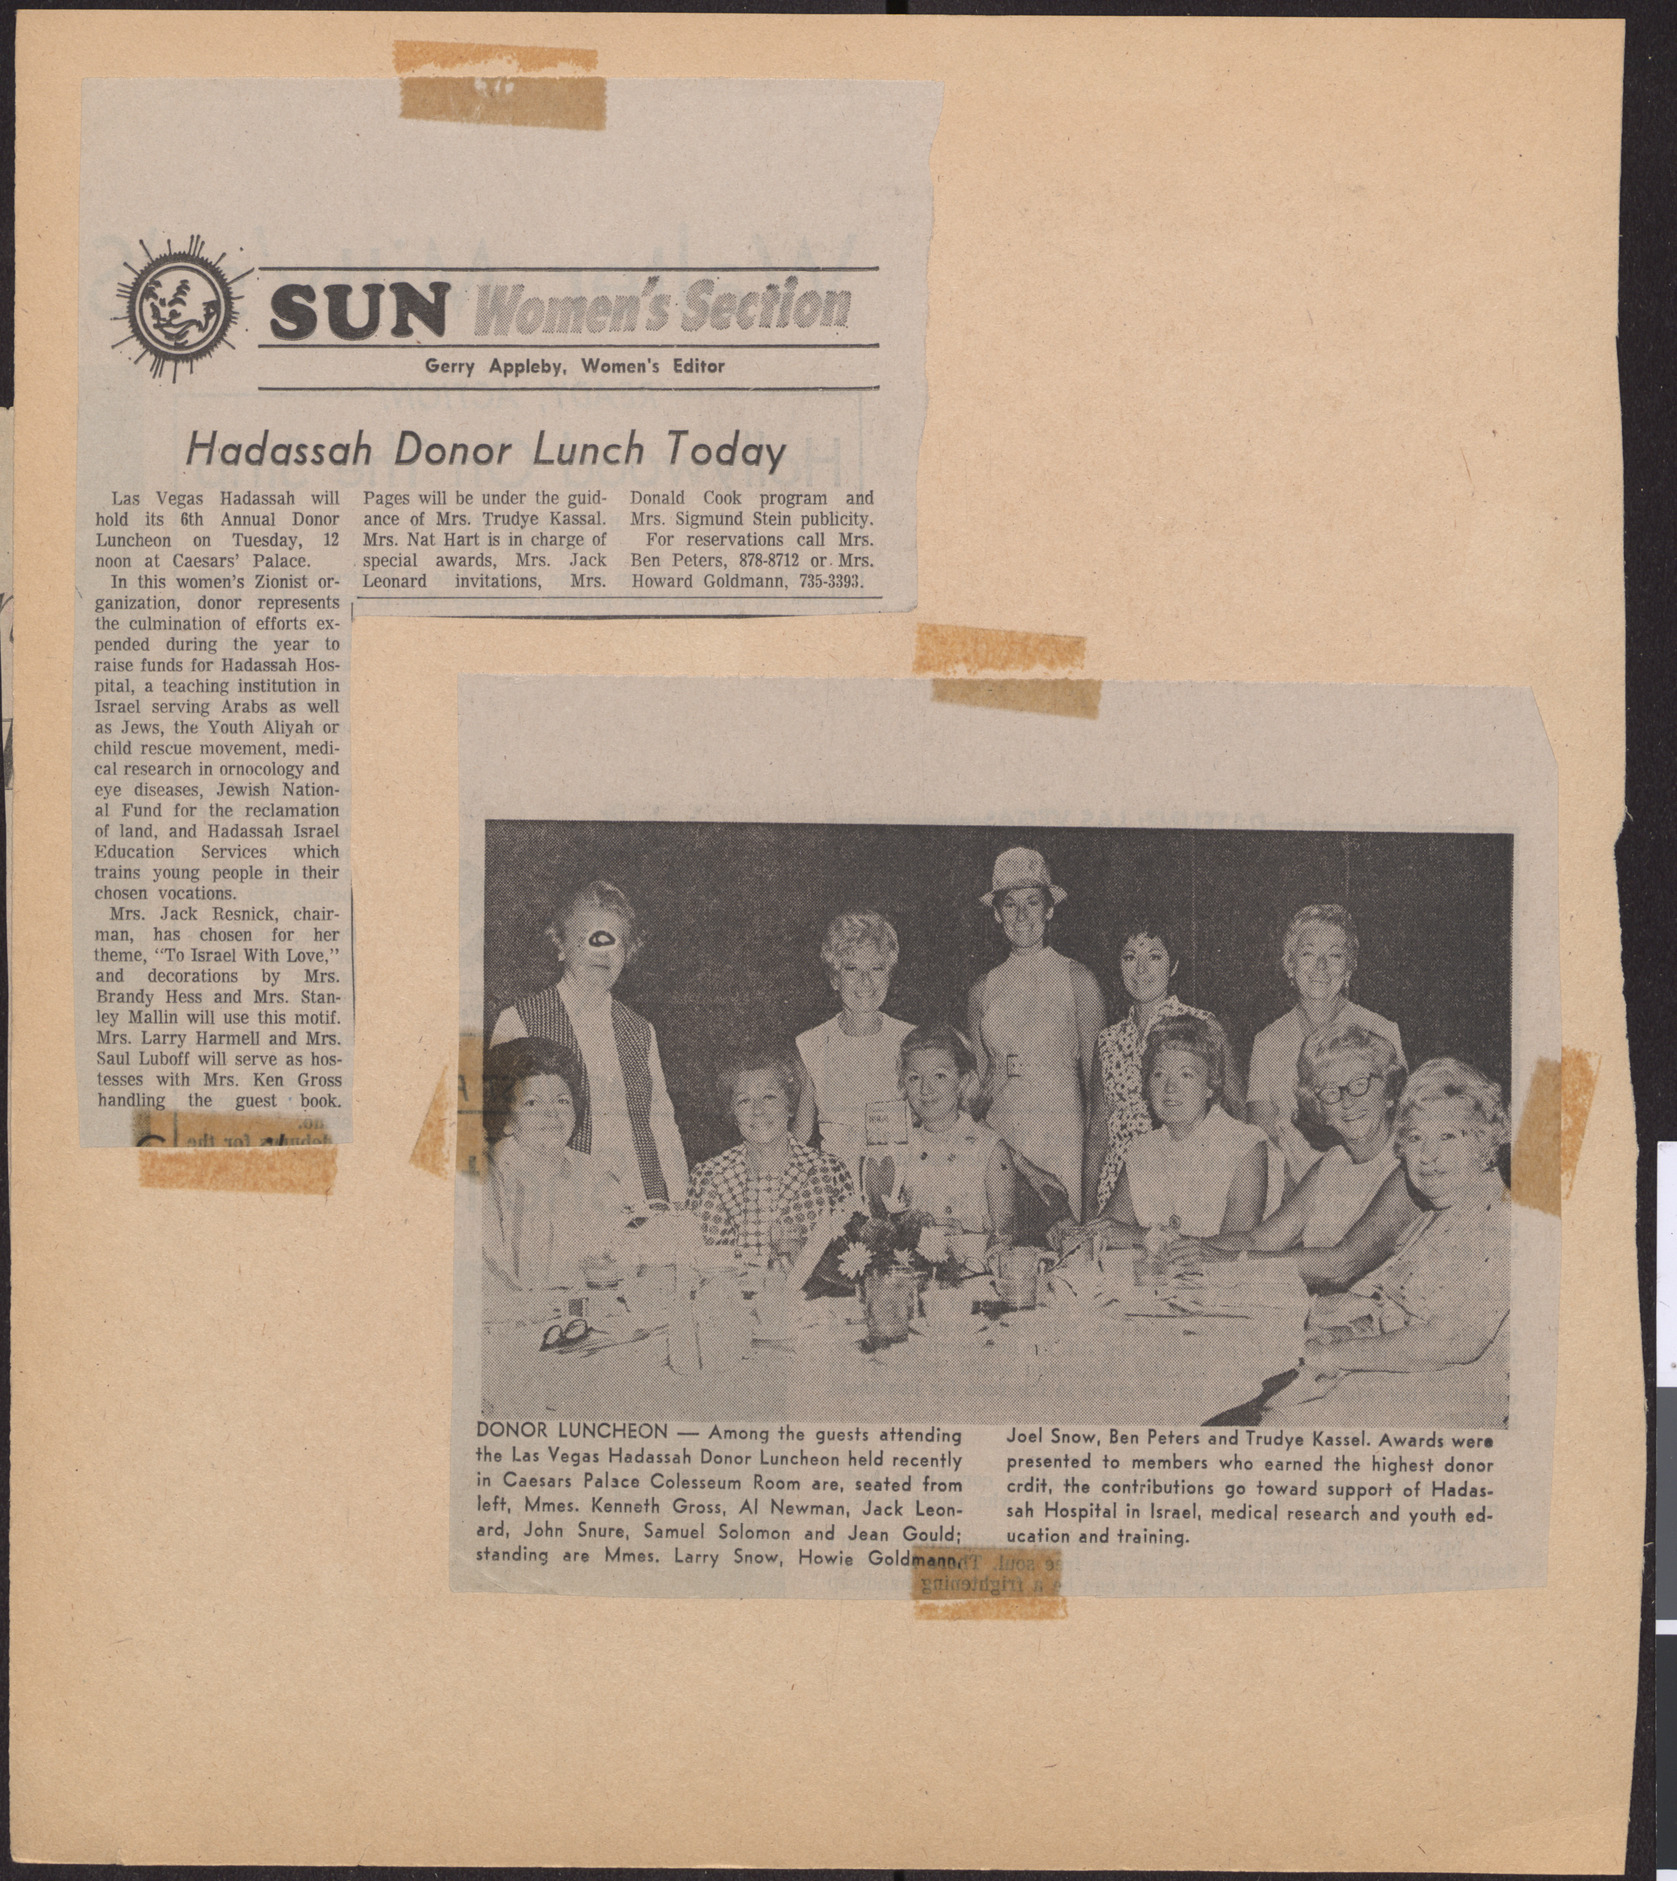 Newspaper clippings about Hadassah donor luncheon, June 1970